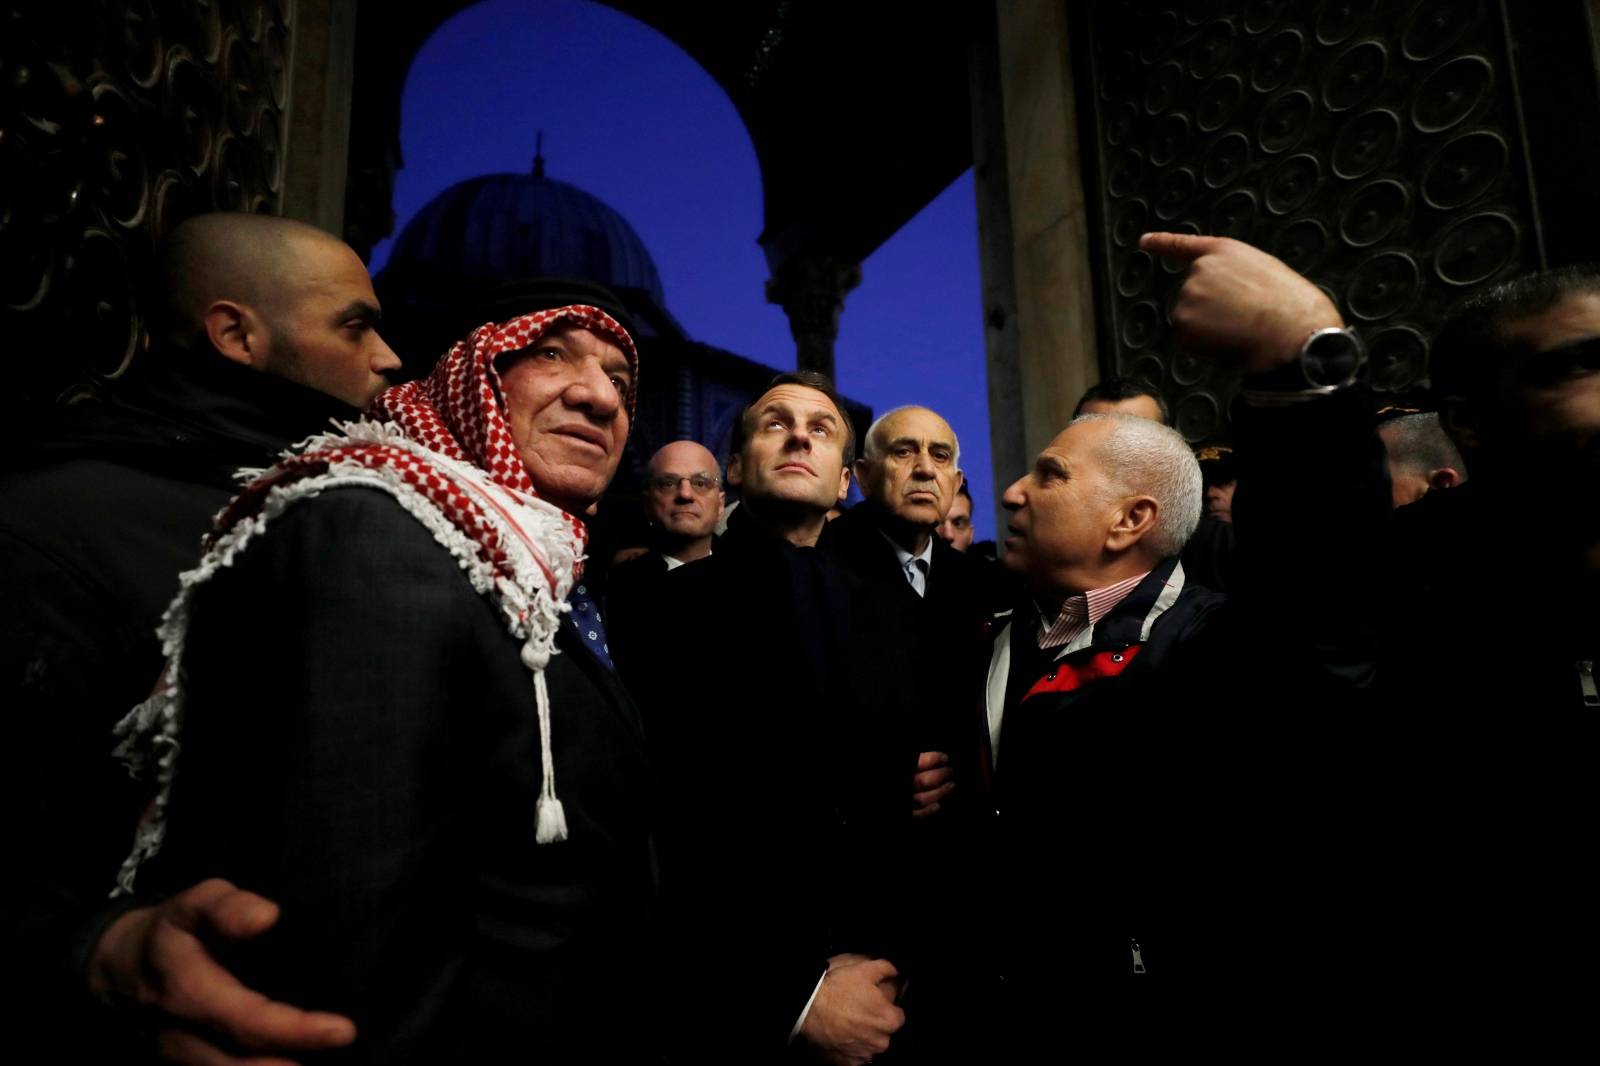 French President Emmanuel Macron looks up as he visits the compound housing al-Aqsa mosque known to Muslims as Noble Sanctuary and to Jews as Temple Mount, in Jerusalem's Old City